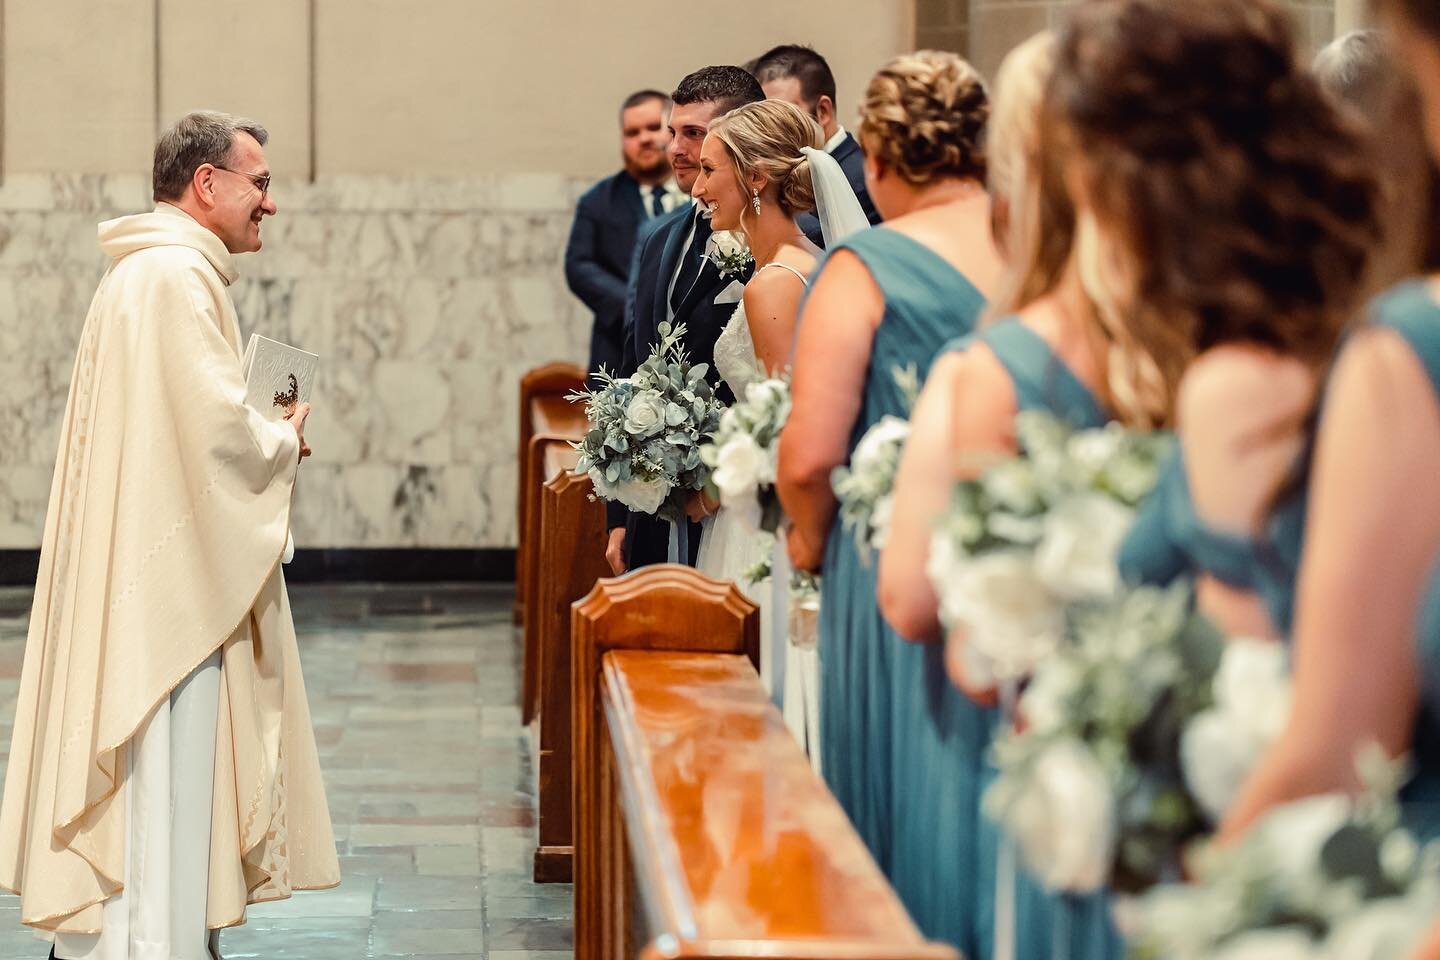 After doing so many weddings you start to get an idea of not only where to stand to capture the best angle, but also the best story!
Whether that&rsquo;s capturing you at the front of the church with the priest who&rsquo;s marrying you, your first ki